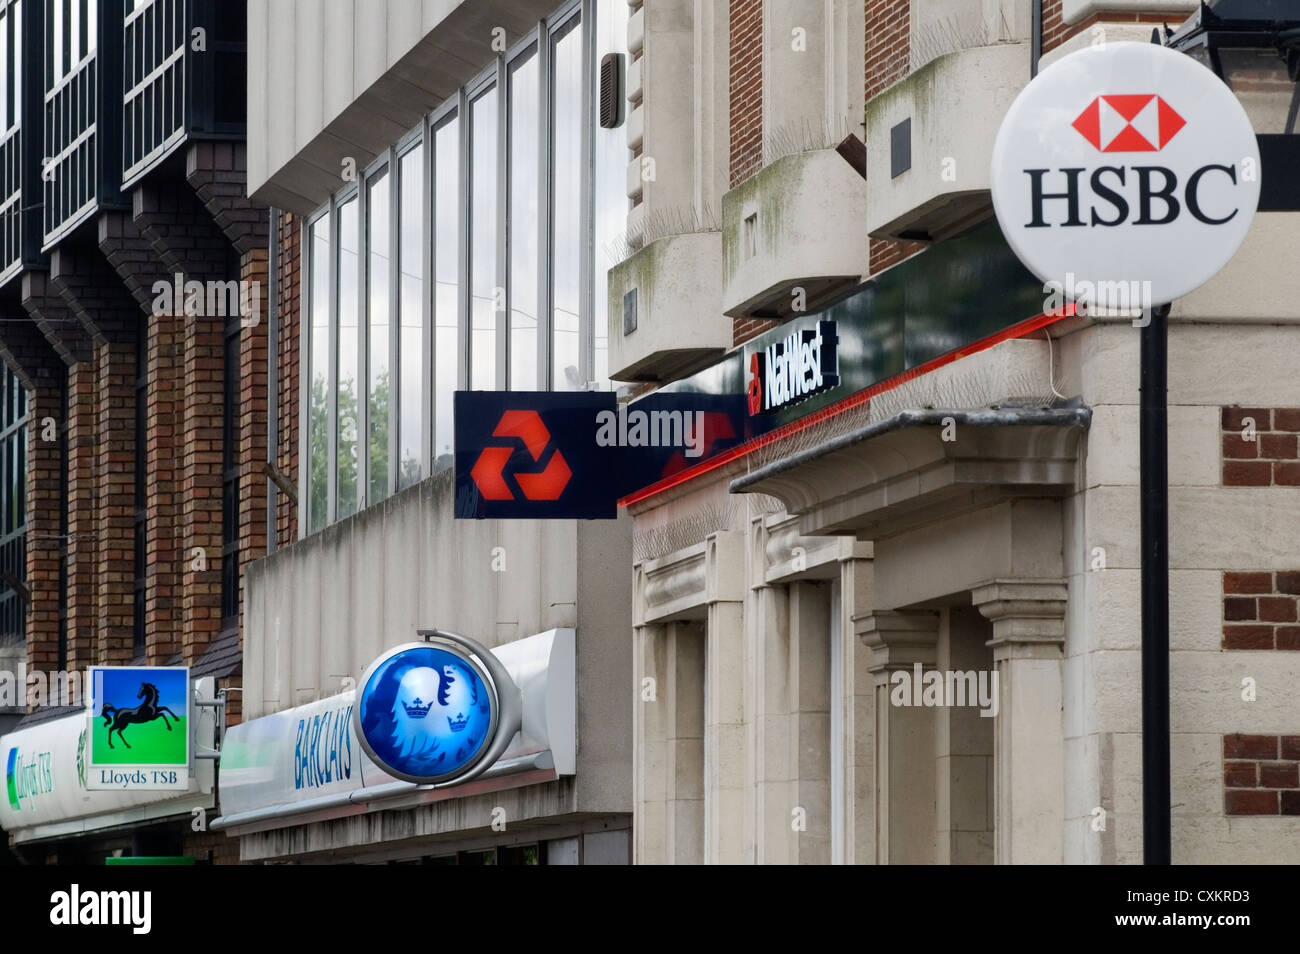 High Street Banks signs home counties UK 2007.  2000s when there were still banks in a local High Street. HSBC, Nat West, National Westminster Bank,  Barclays,  Lloyds, TSB, and a  Cashpoint HOMER SYKES Stock Photo